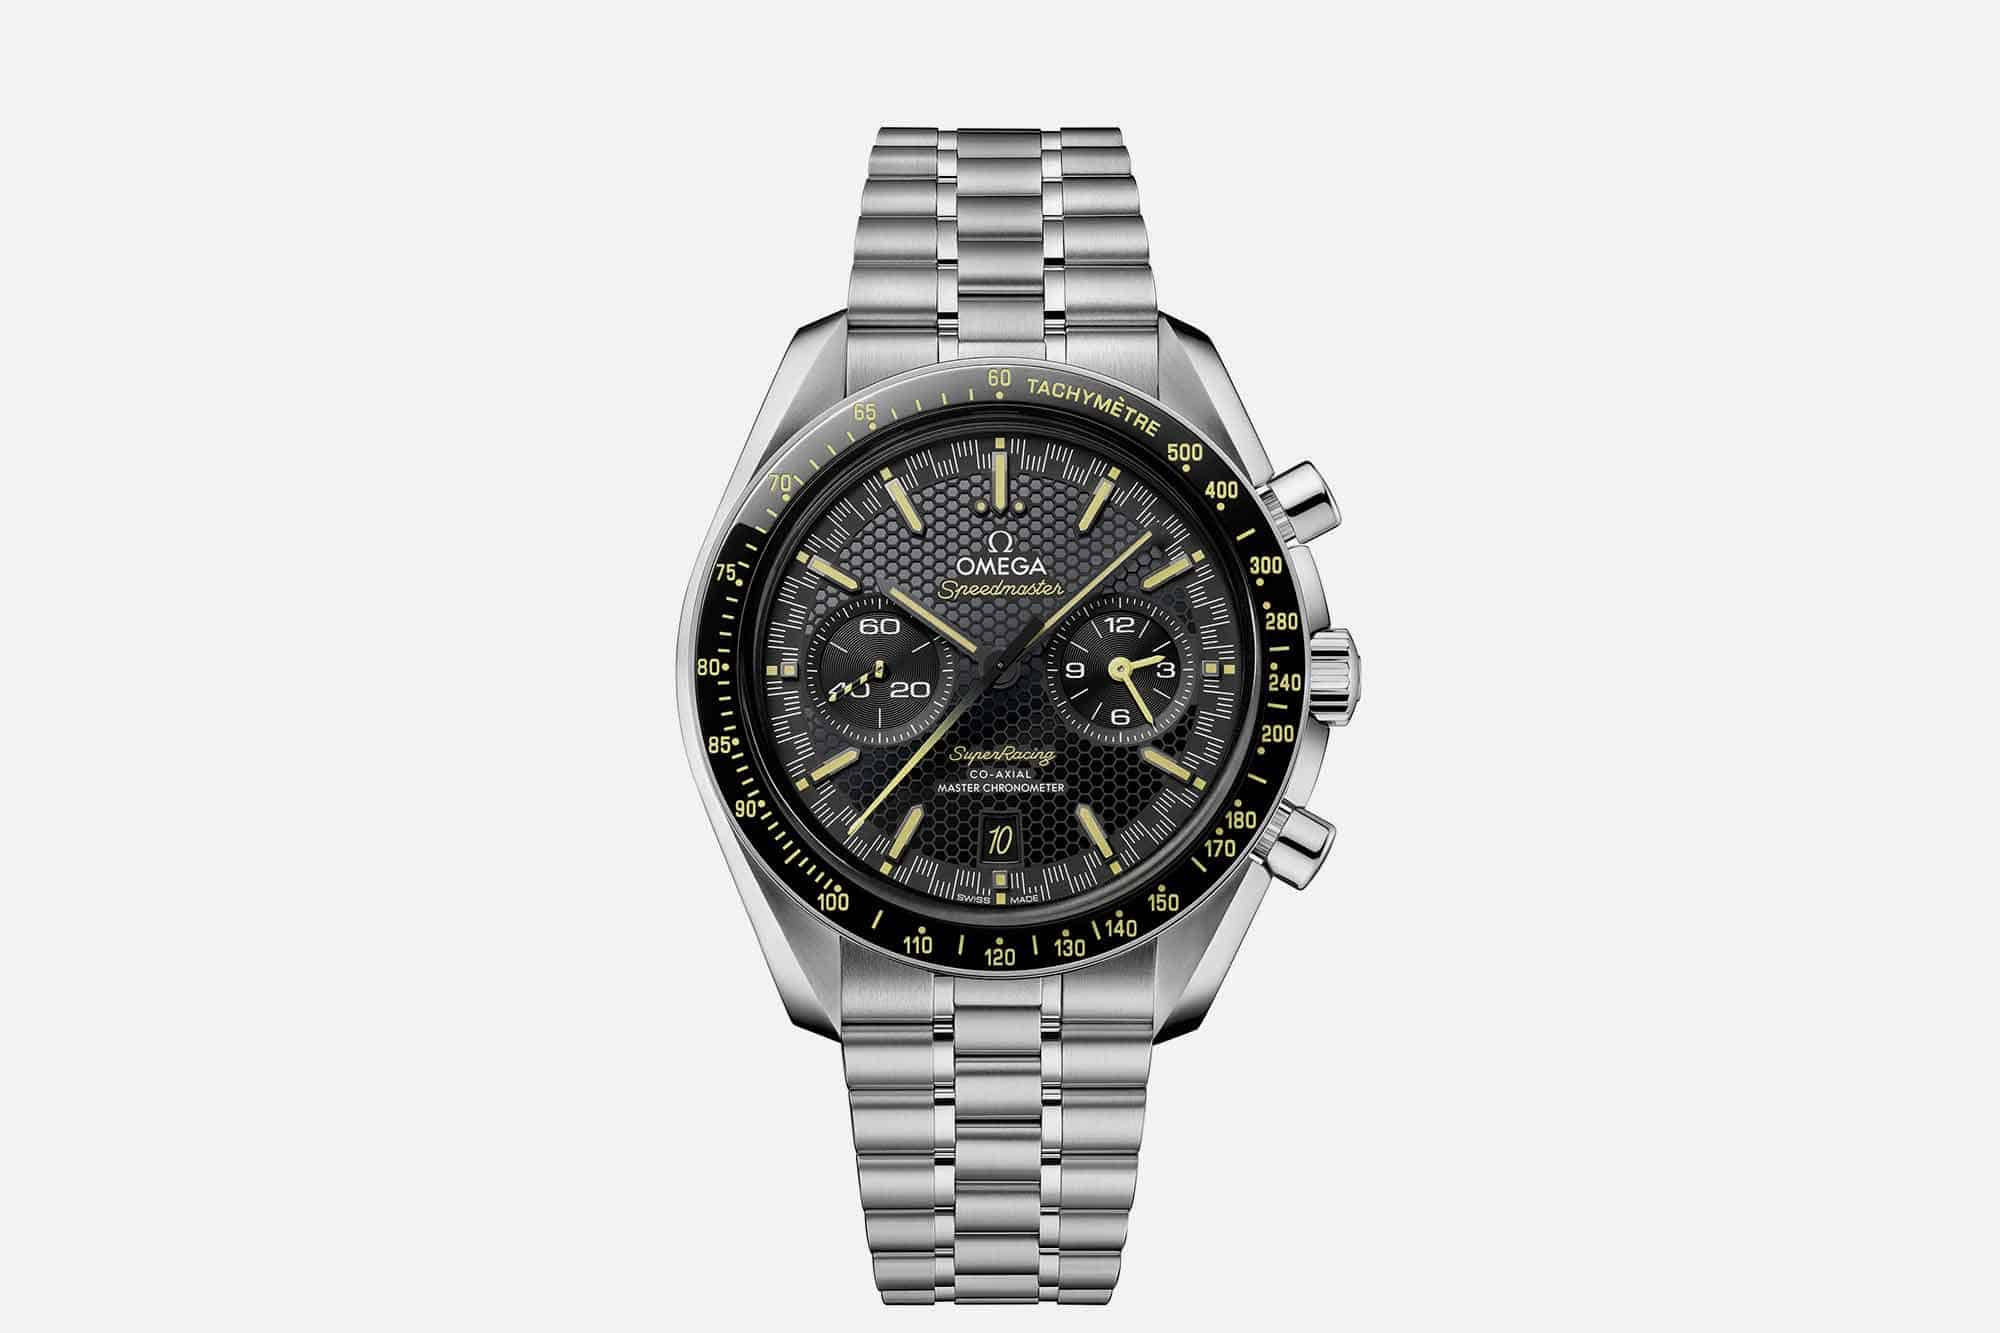 Omega’s New Speedmaster Super Racing Has a Brand New Regulating System Allowing for Unheard of Accuracy